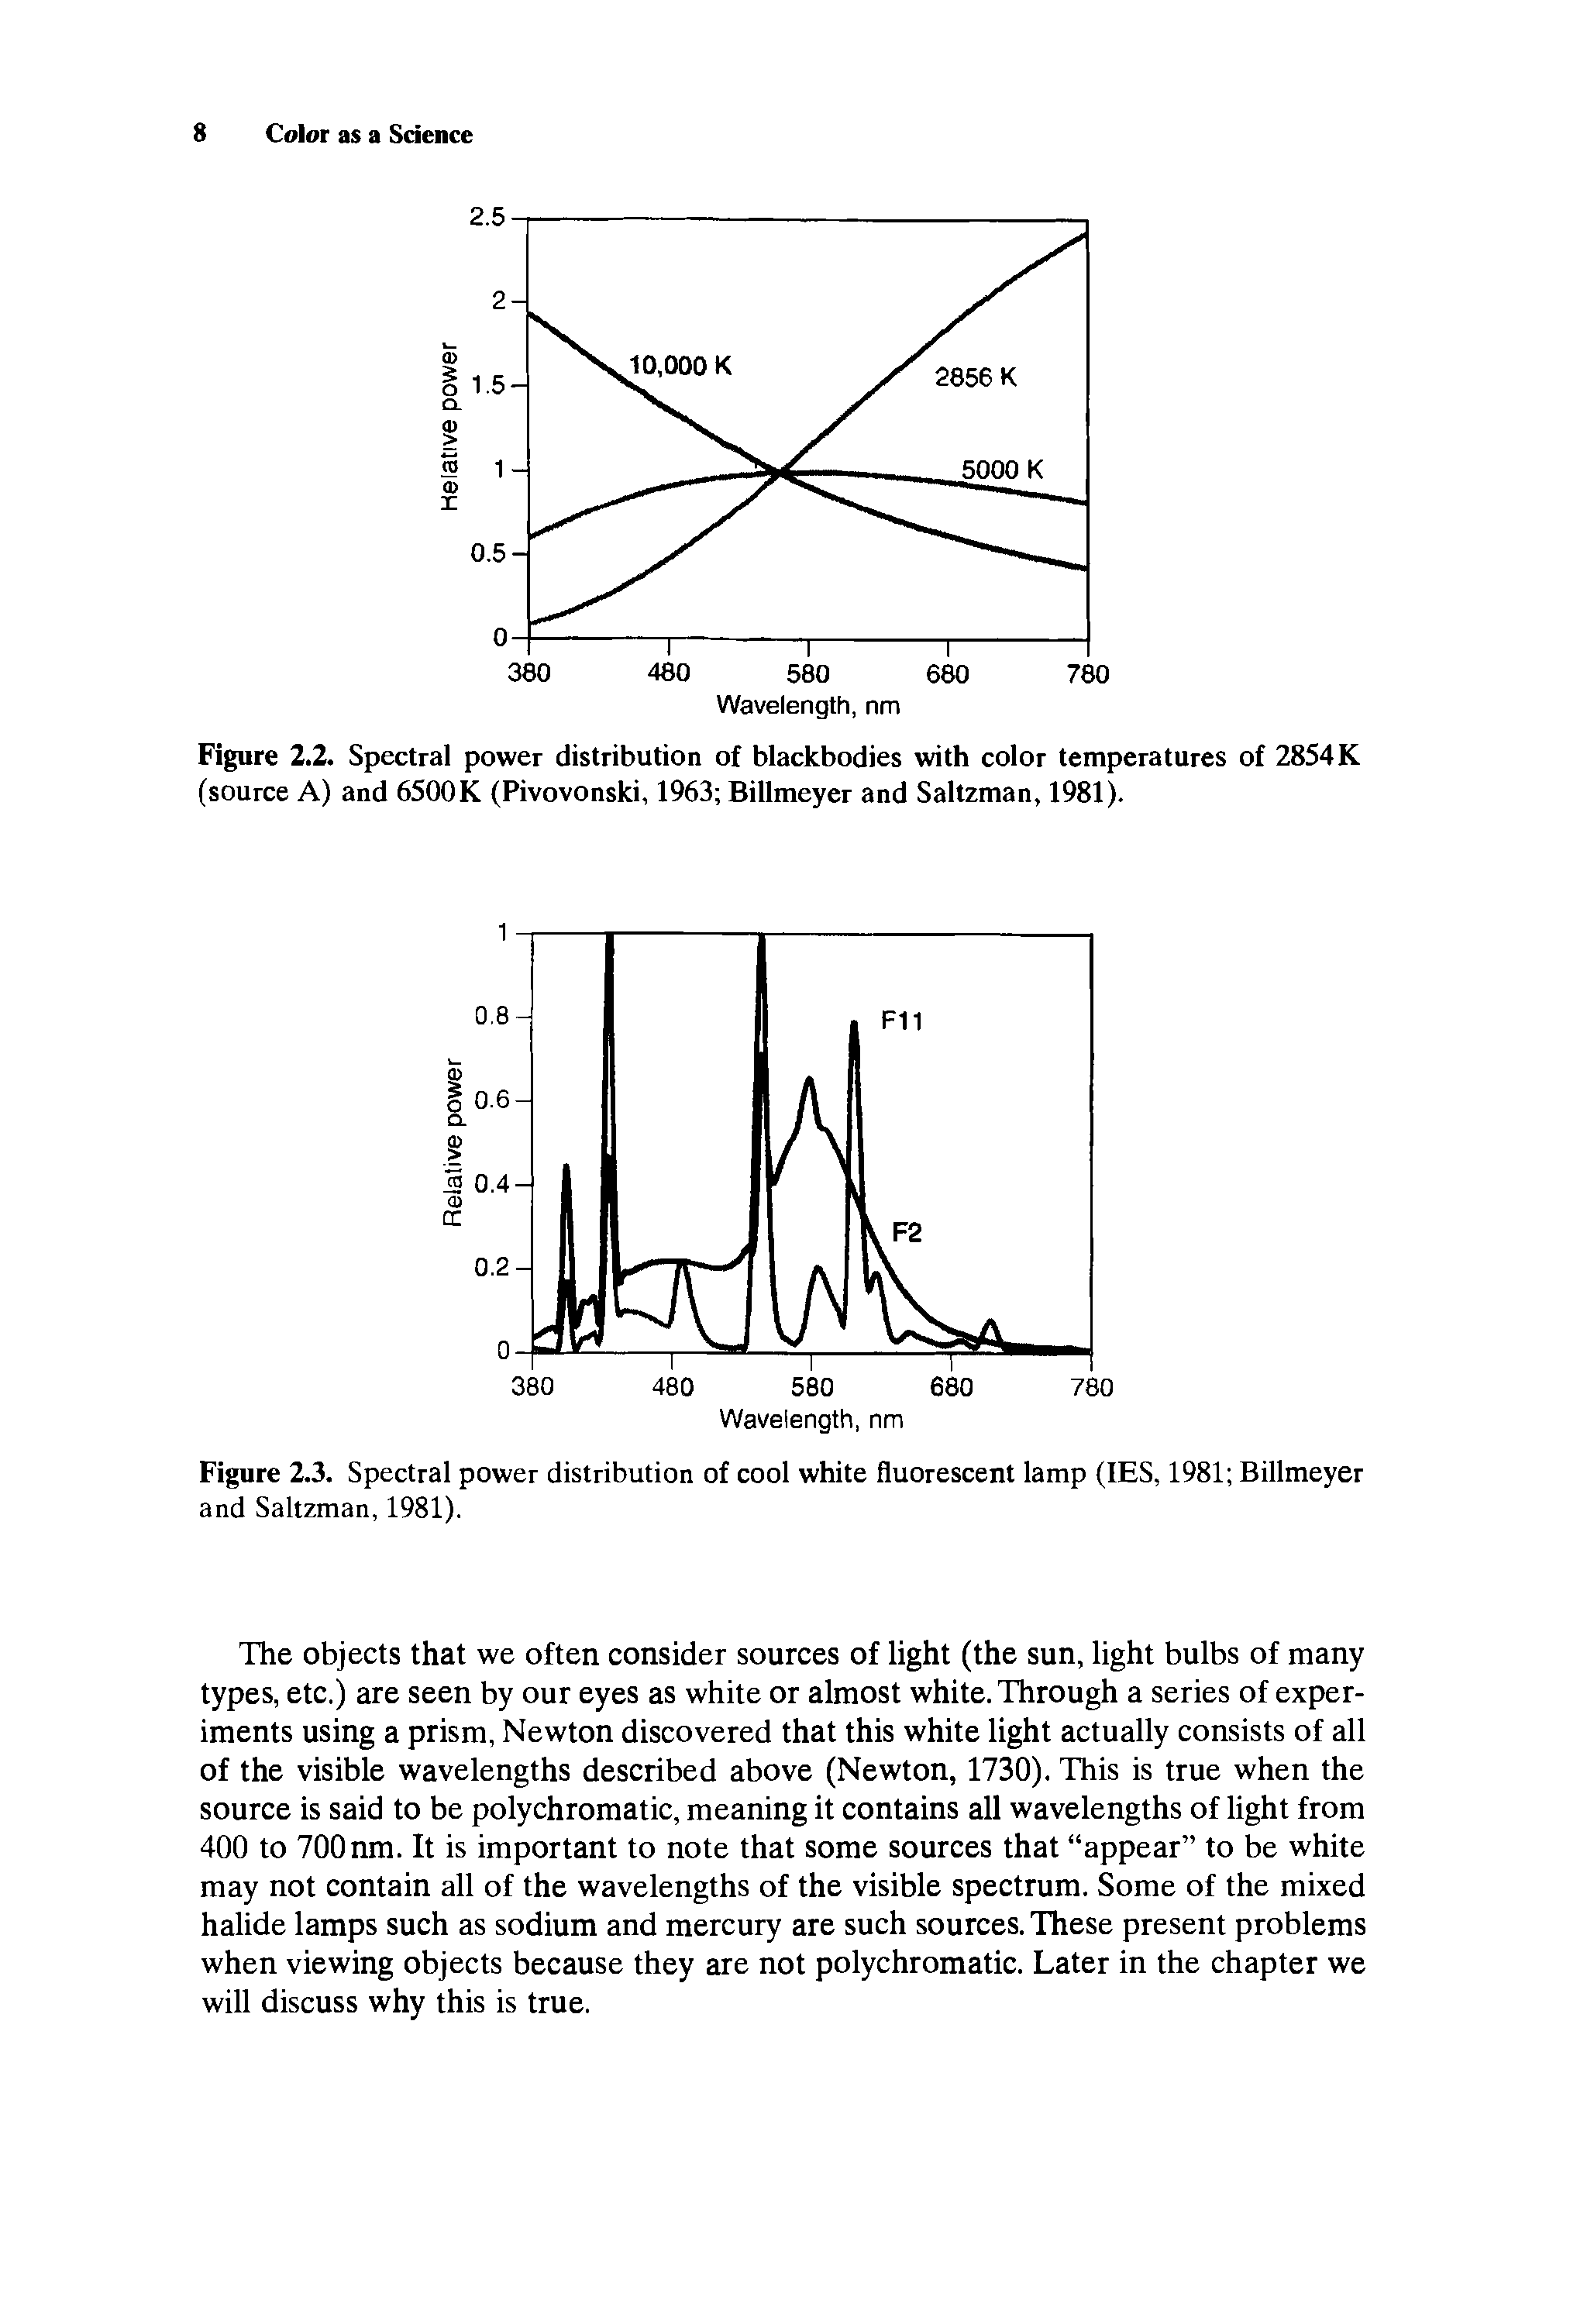 Figure 2.2. Spectral power distribution of blackbodies with color temperatures of 2854 K (source A) and 6500K (Pivovonski, 1963 Billmeyer and Saltzman, 1981).